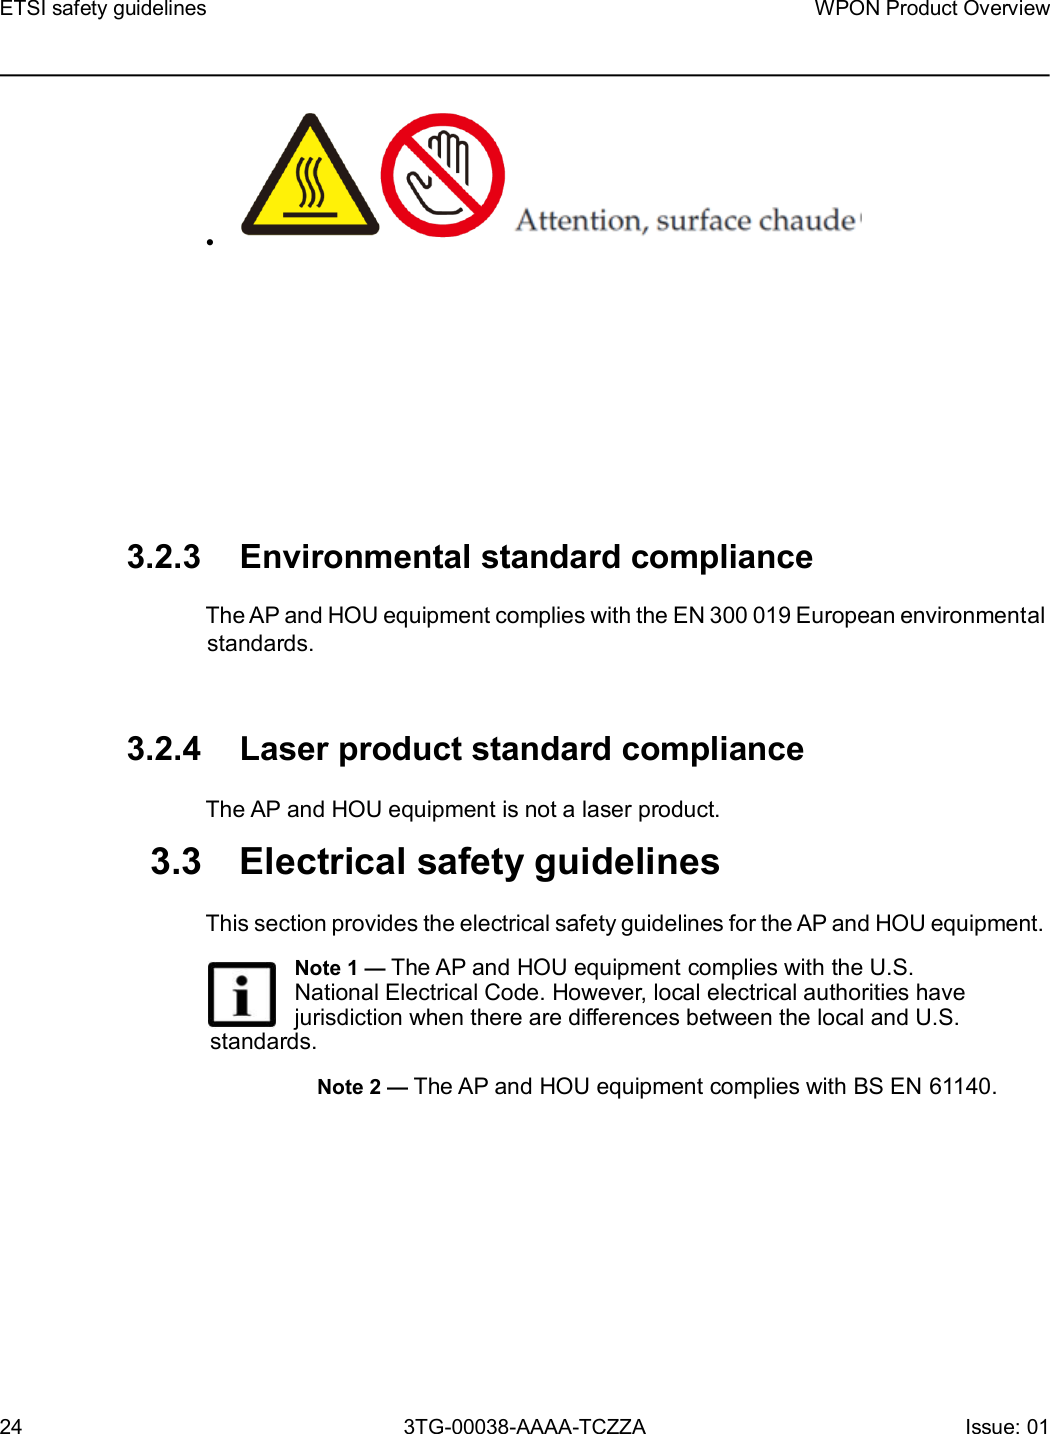 Page 24 of Nokia Bell 7577WPONAPED WPON User Manual WPON Product Overview